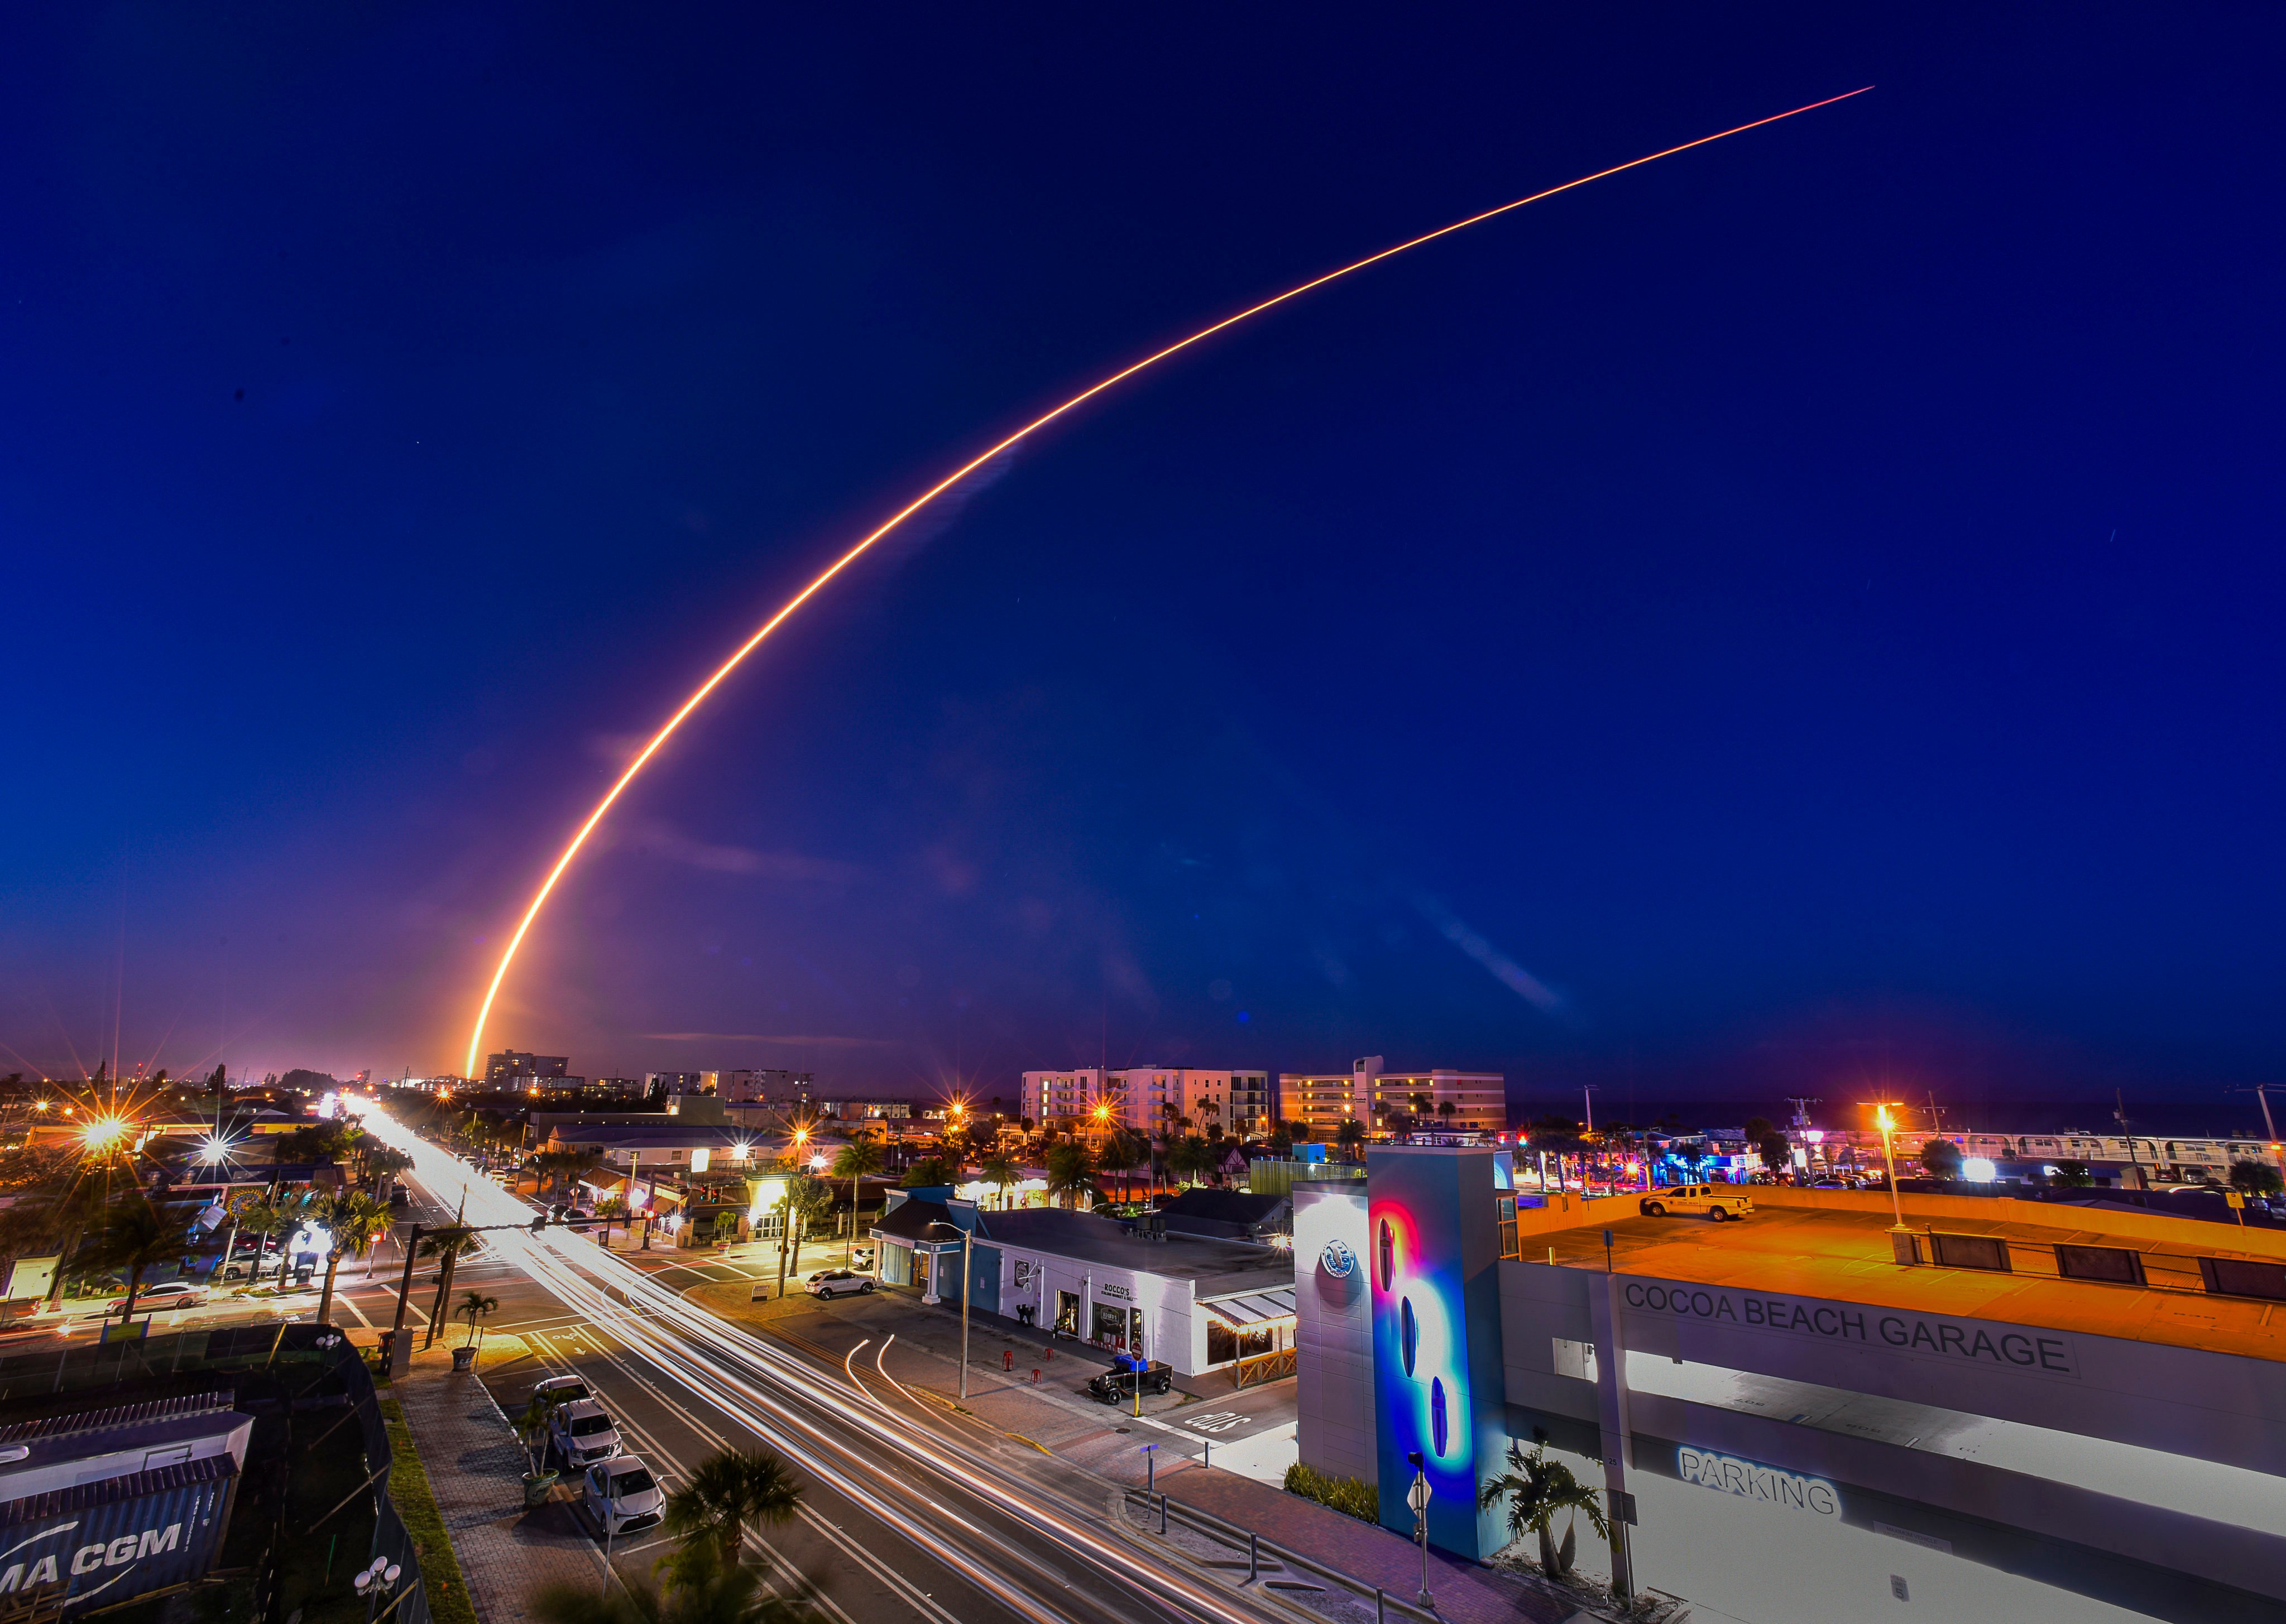 A SpaceX Falcon 9 rocket carrying Starlink satellites blasts off from Launch Complex 40 at Cape Canaveral Space Force Station on March 4. Photo: Florida Today via AP